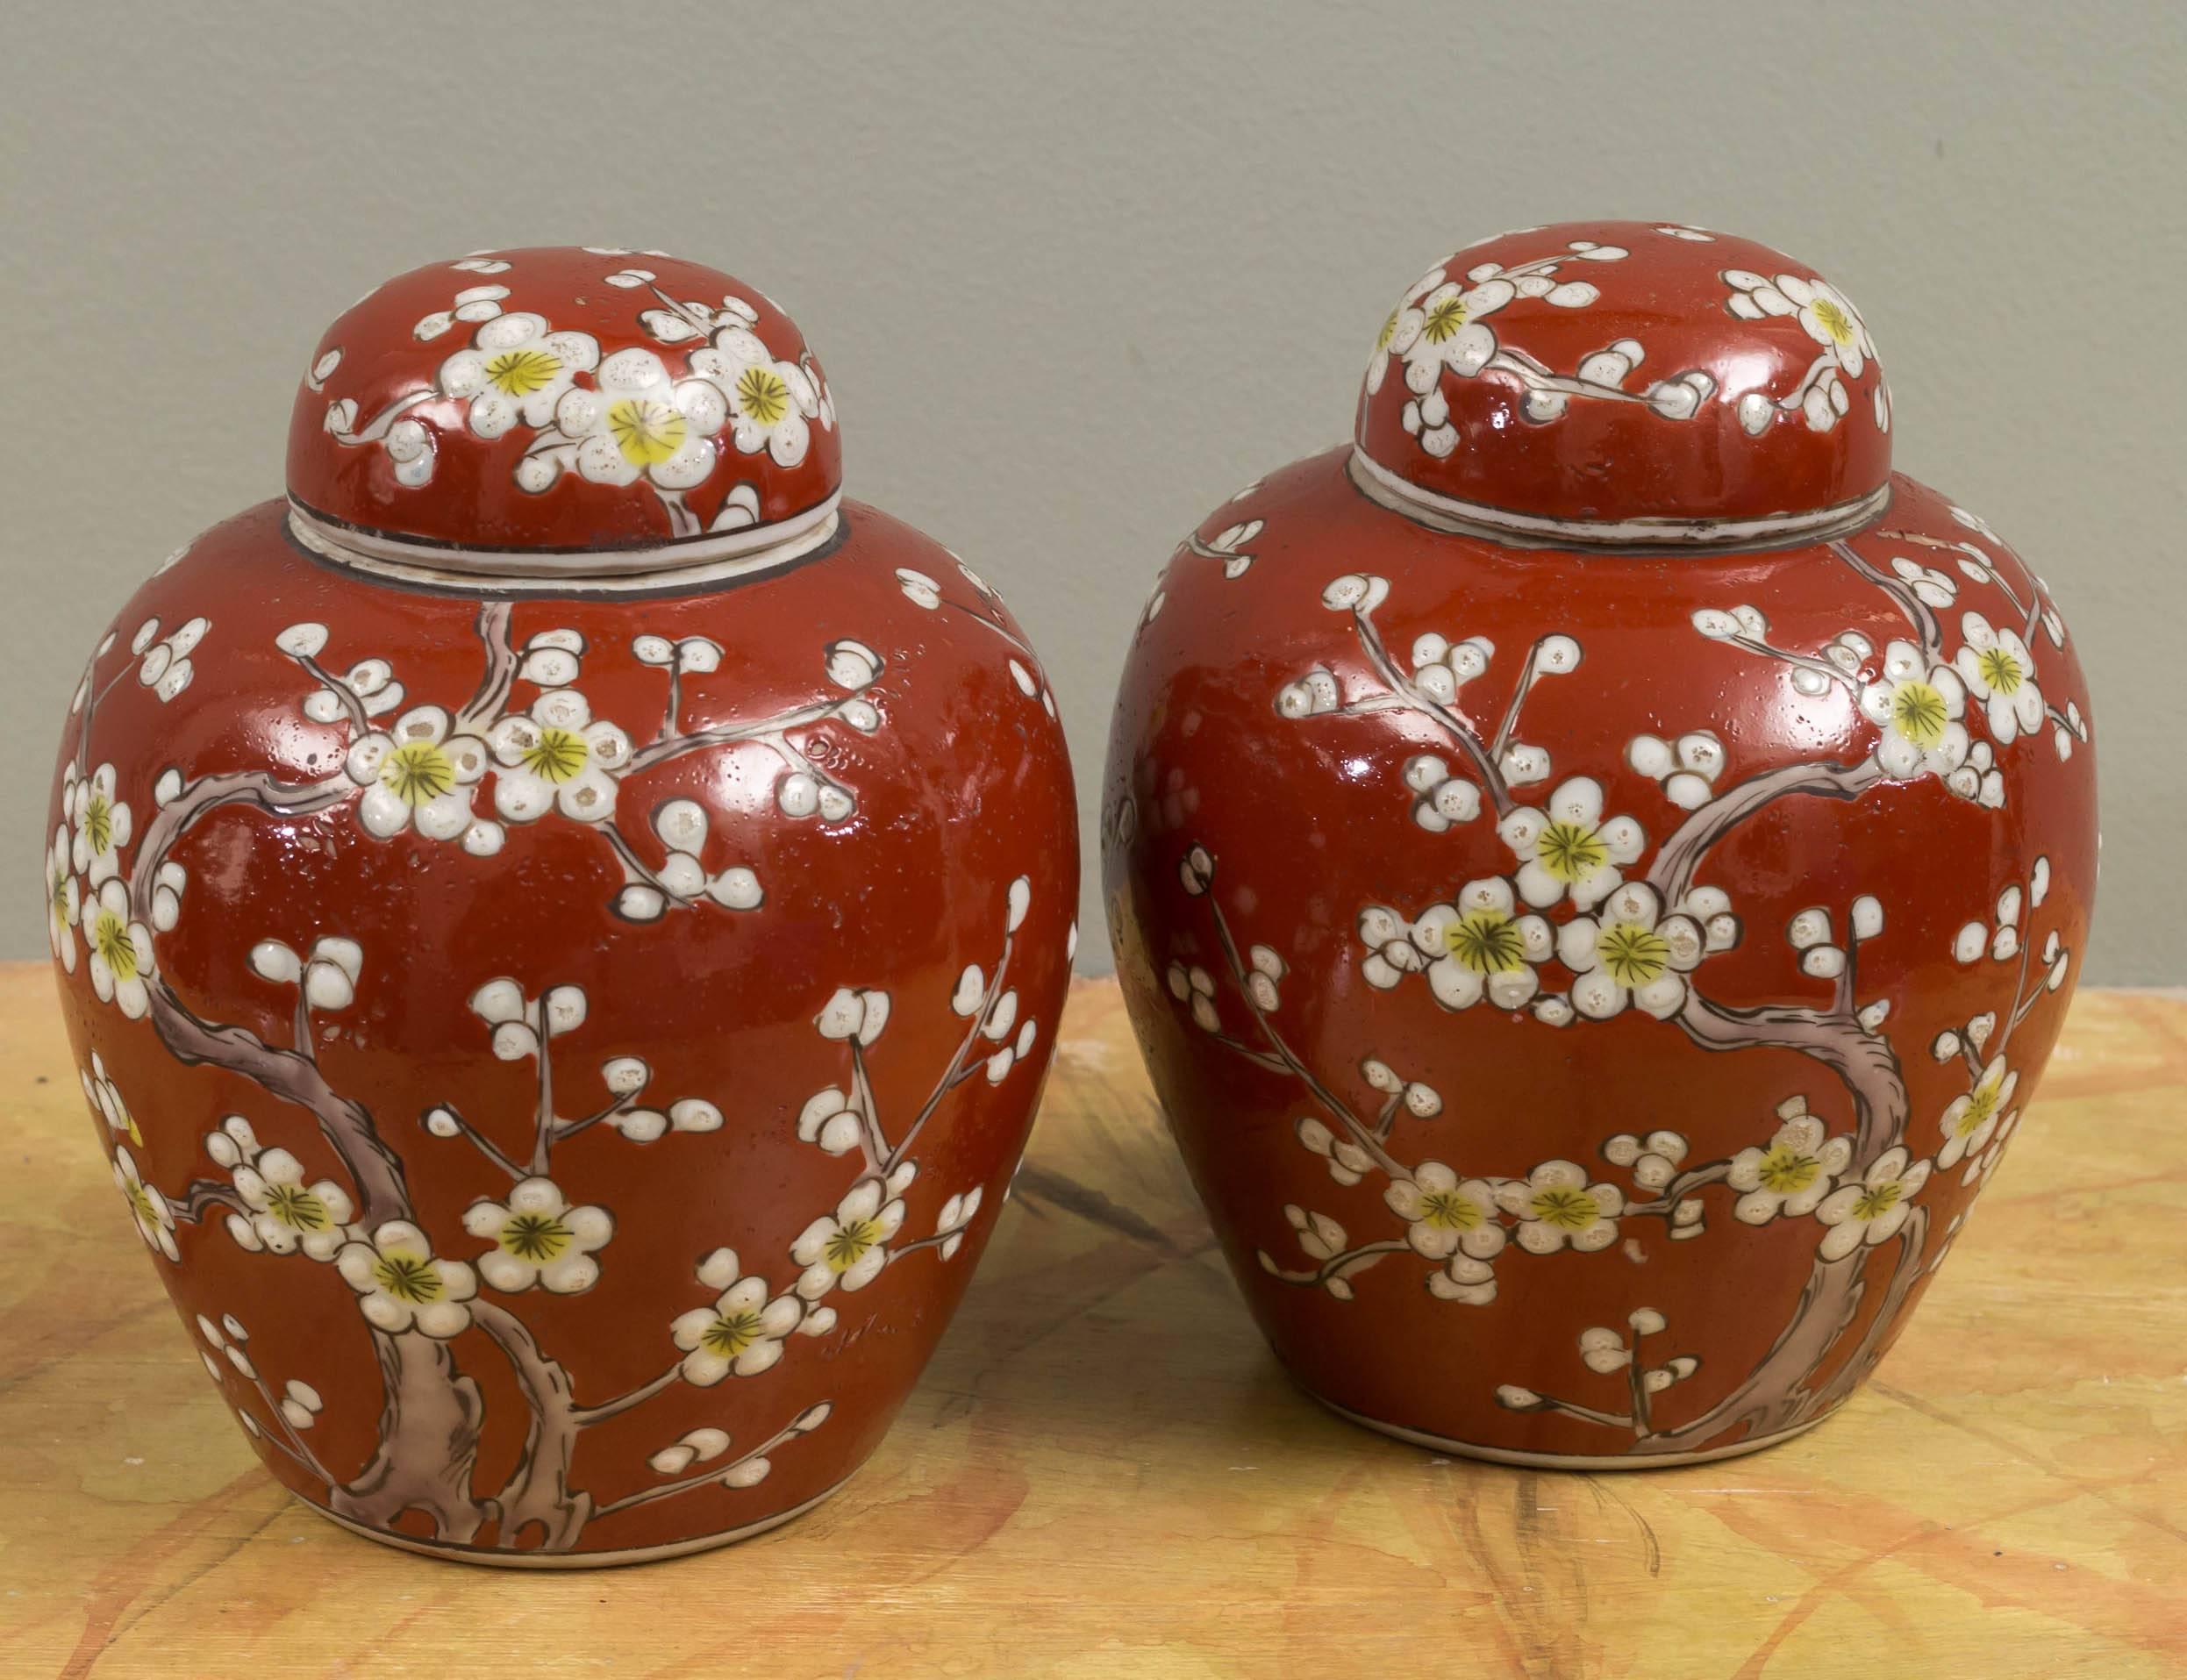 Each ceramic body and domical lid decorated with blossoming branches against a sanguine-colored background. With original import stamp on the base.